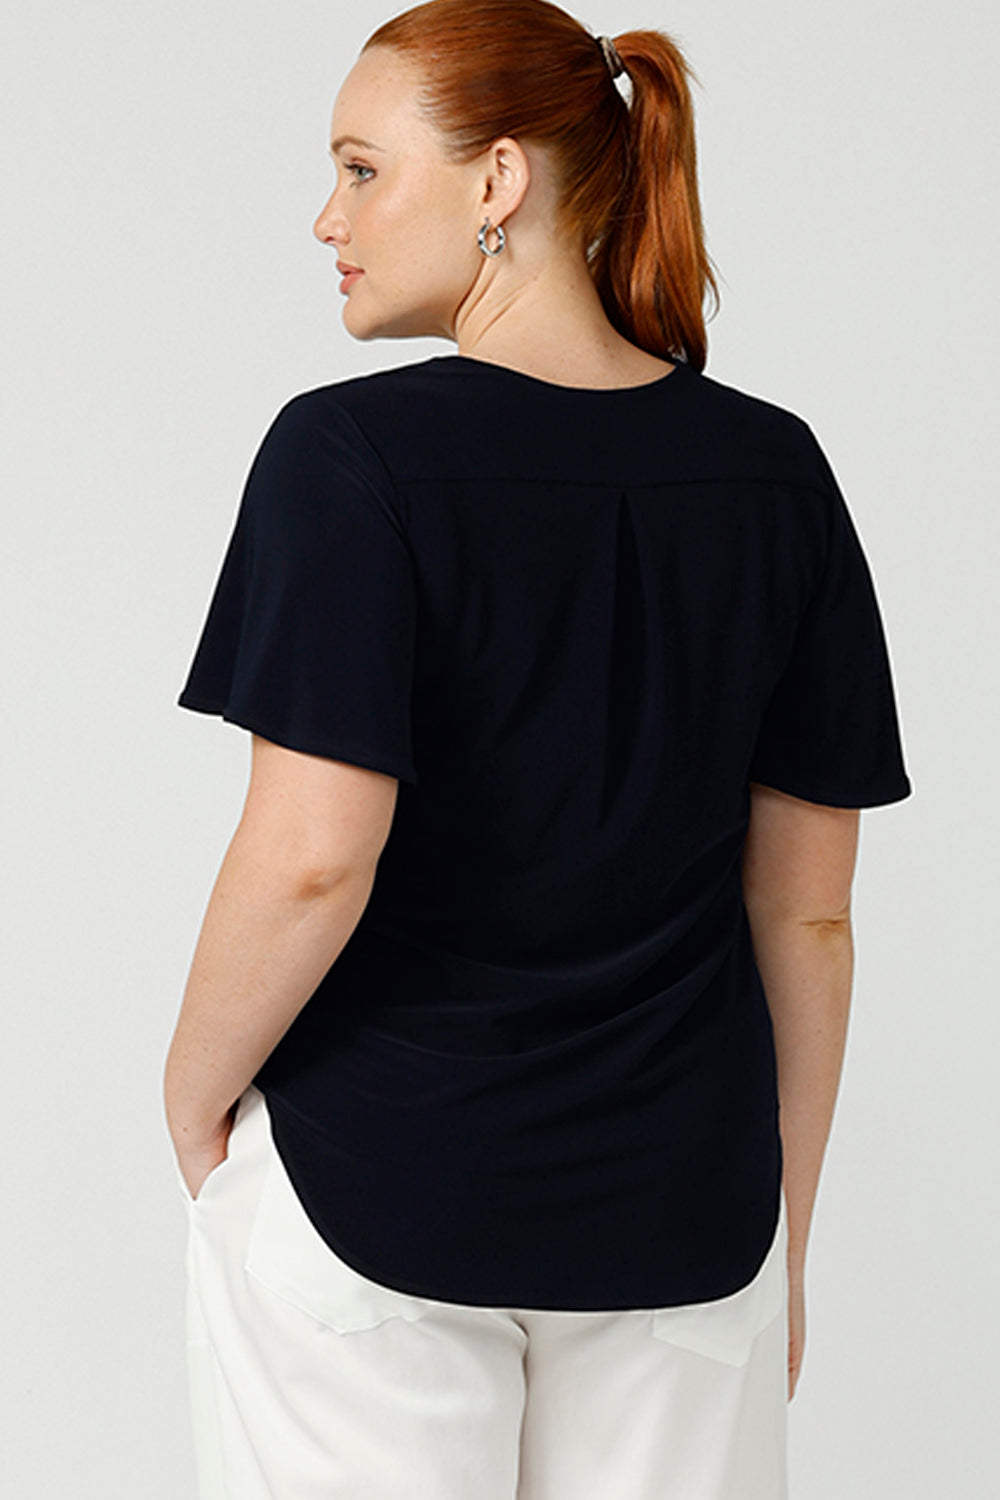 Back view of the shoulder yoke and back pleat of a navy blue jersey top. Worn by a size 12, curvy woman this semi-fitted, V-neck top has flutter sleeves. Made in Australia by women's clothing brand, Leina & Fleur , this classic top is great for capsule wardrobes, smart casual wear and as a work blouse. Shop women's clothing online in sizes 8 to 24 at L&F's online fashion boutique!